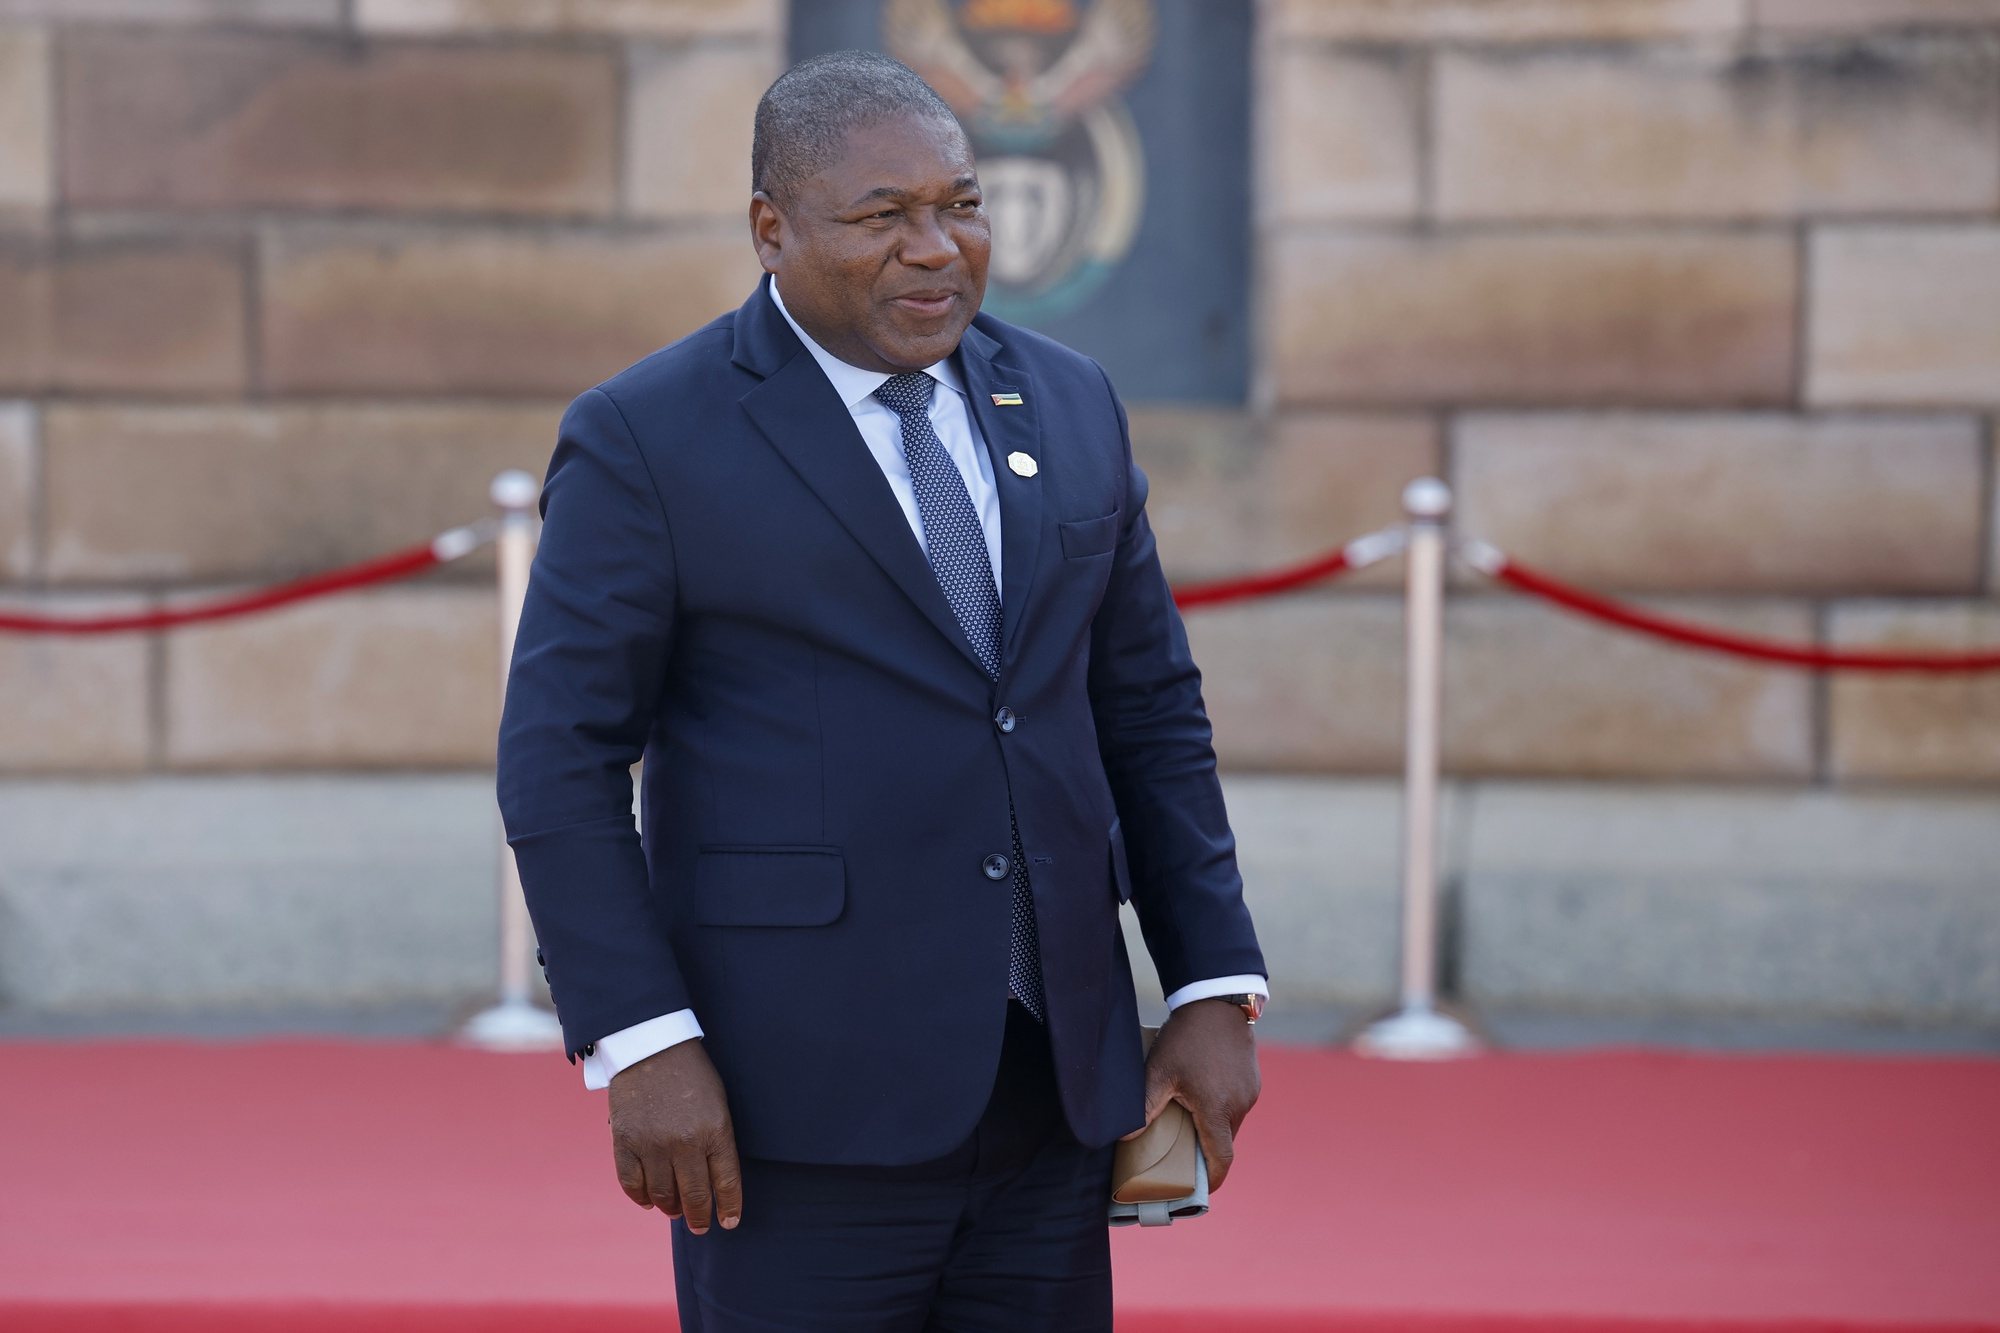 epa11422829 Mozambique&#039;s President Filipe Nyusi arrives for Cyril Ramaphosa&#039;s inauguration ceremony as South Africa&#039;s president at the Union Buildings in Pretoria, South Africa, 19 June 2024. Ramaphosa was re-elected as South Africa&#039;s president by the National Assembly on 14 June 2024, following the country&#039;s general elections held on 29 May 2024. South Africa President Cyril Ramaphosa will be sworn in for his second term on 19 June.  EPA/PHILL MAGAKOE / POOL